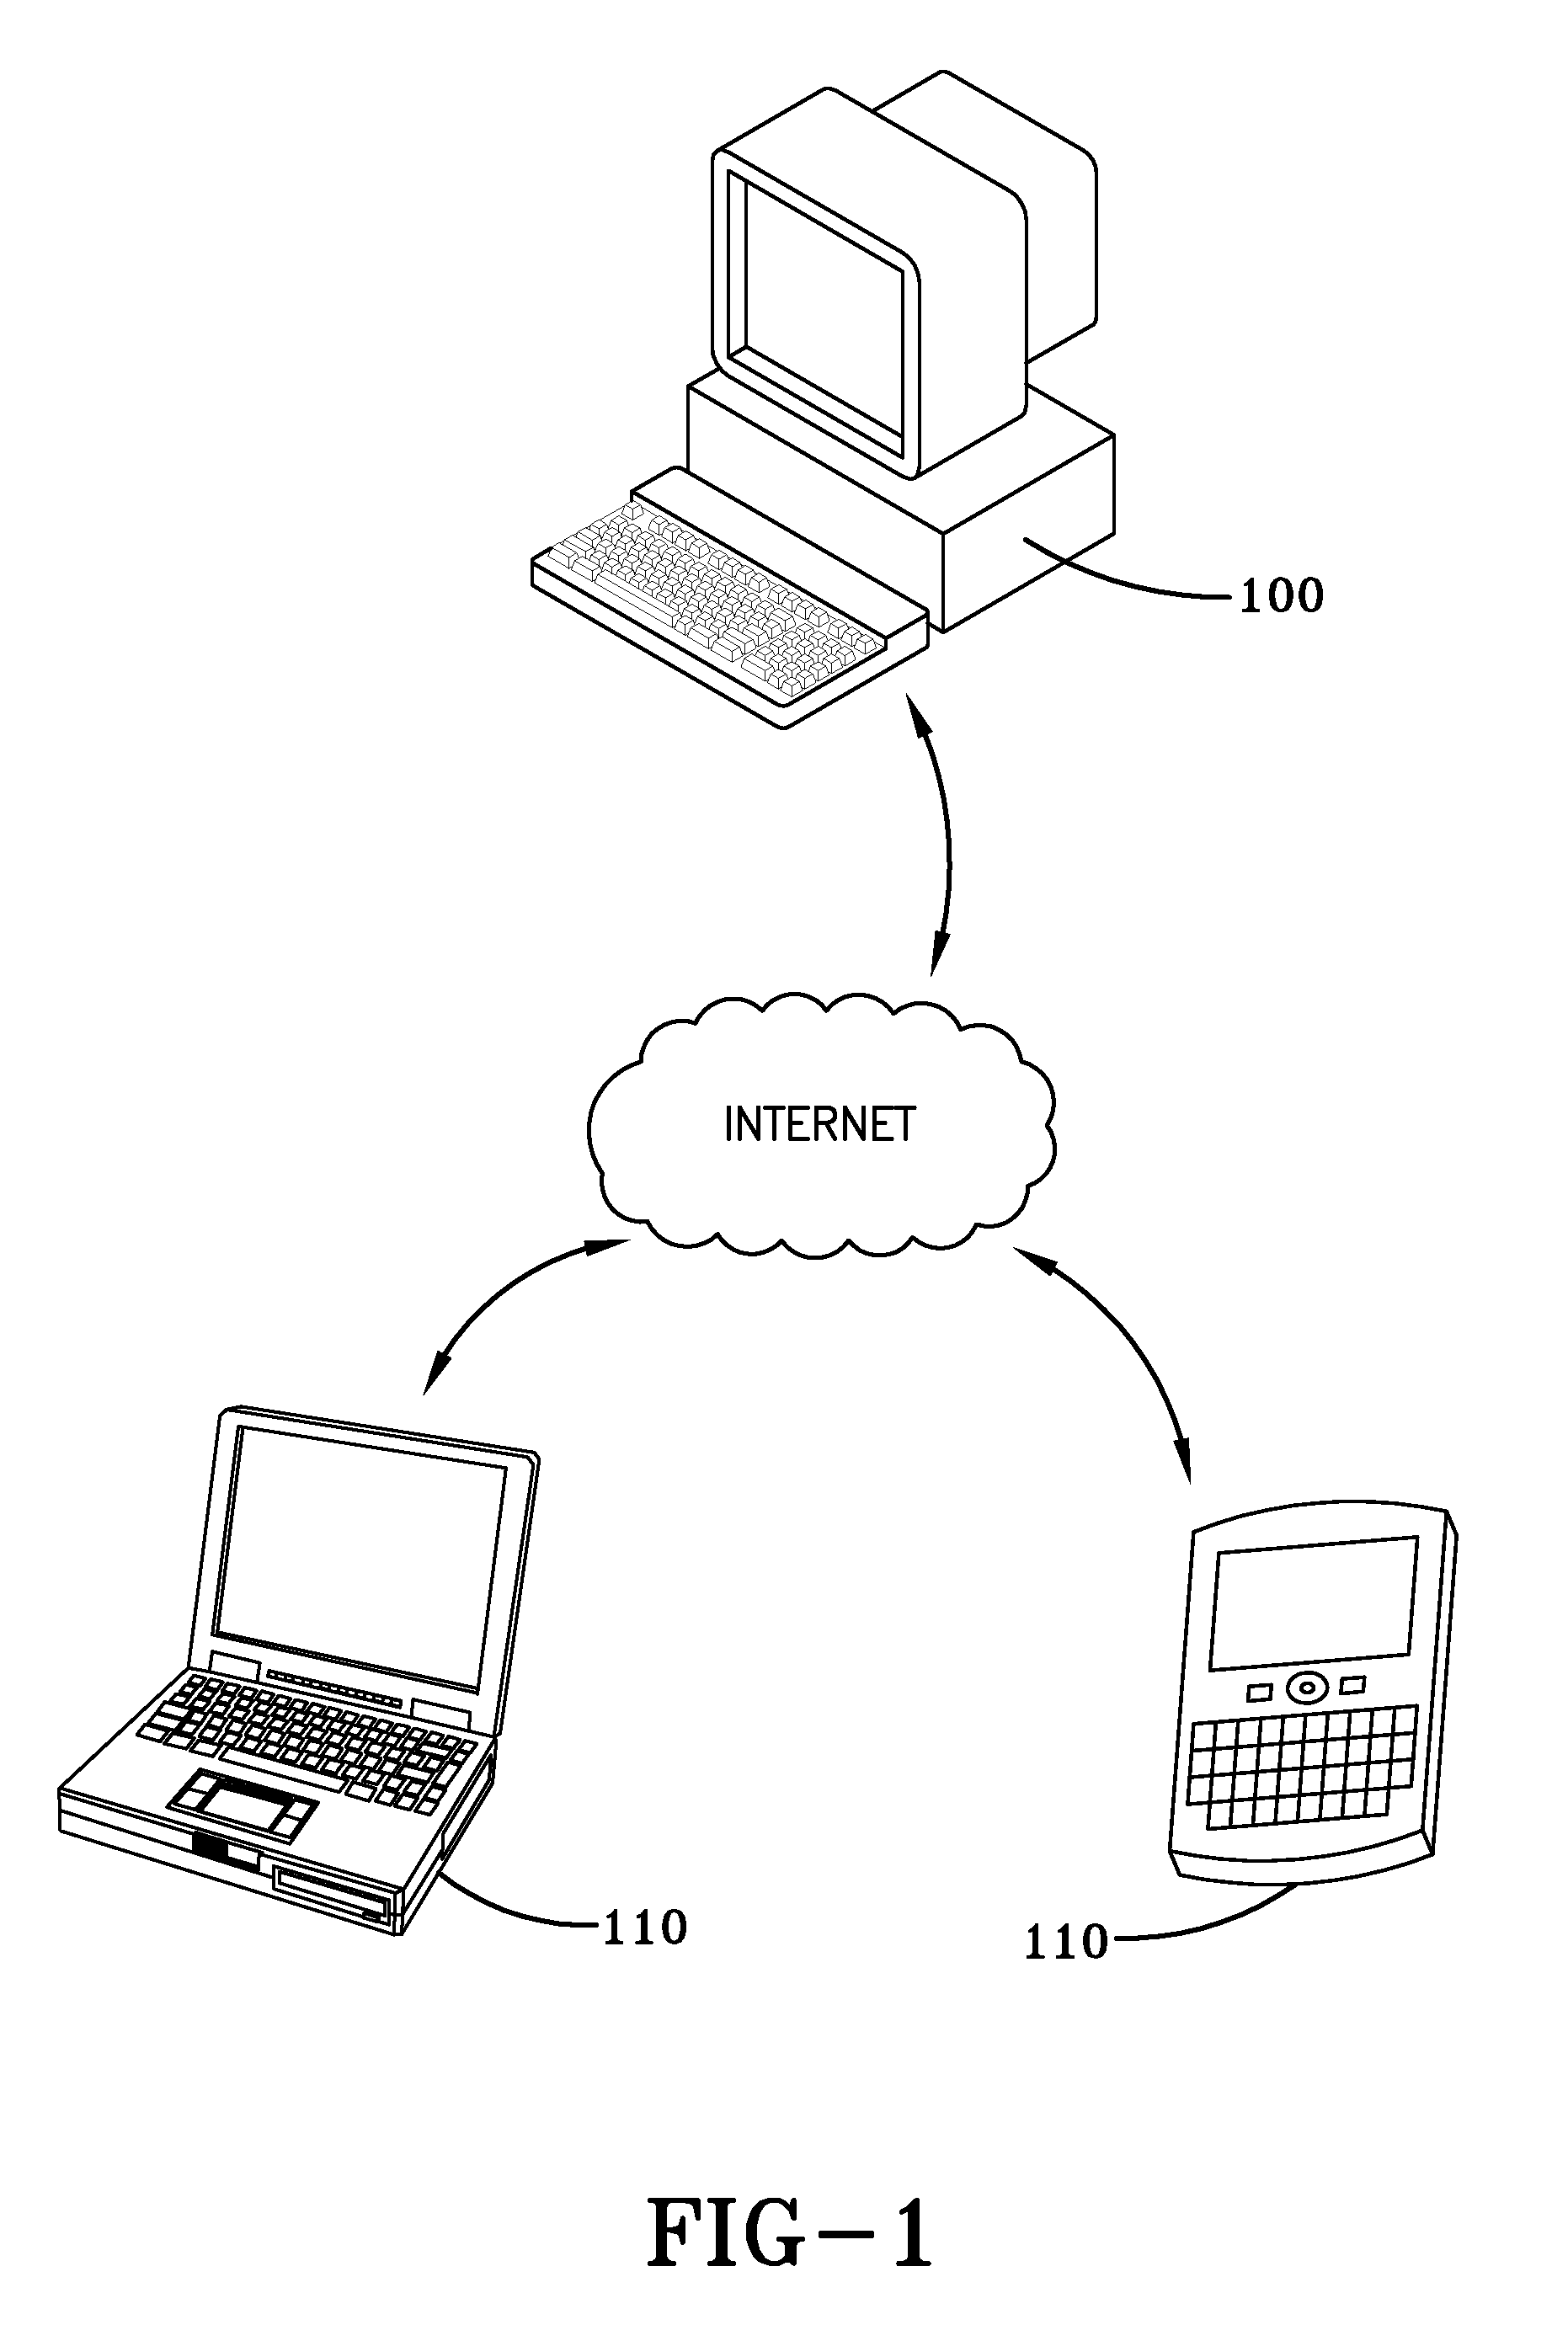 System and method for ensuring security of data stored on electronic computing devices